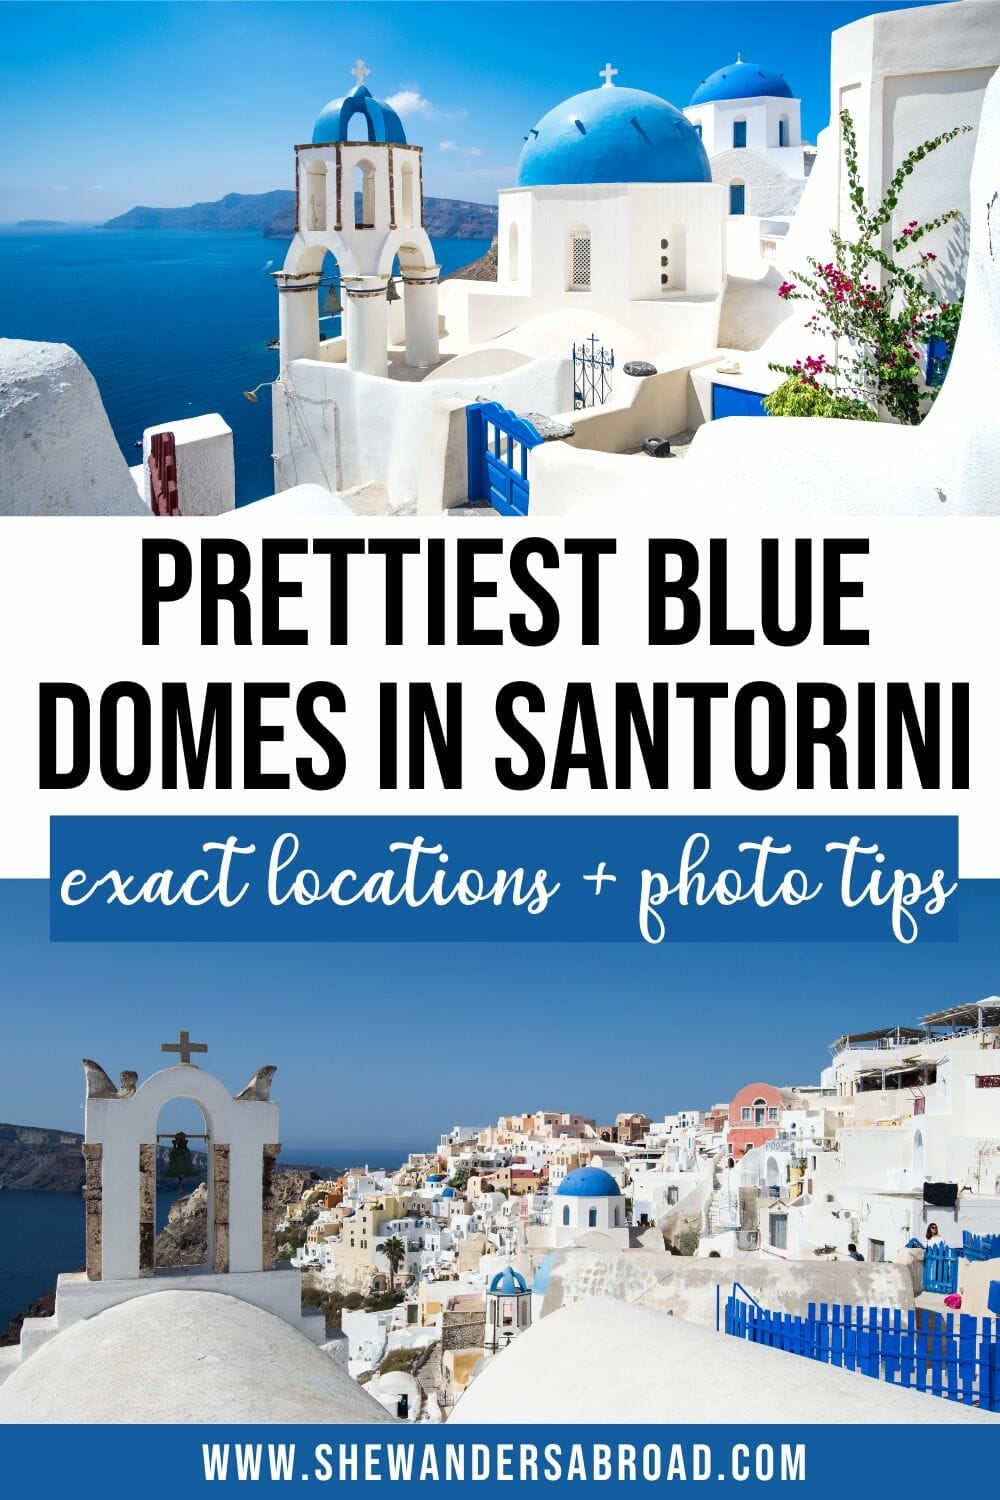 Blue Domes of Santorini: Where to Find & How to Photograph Them